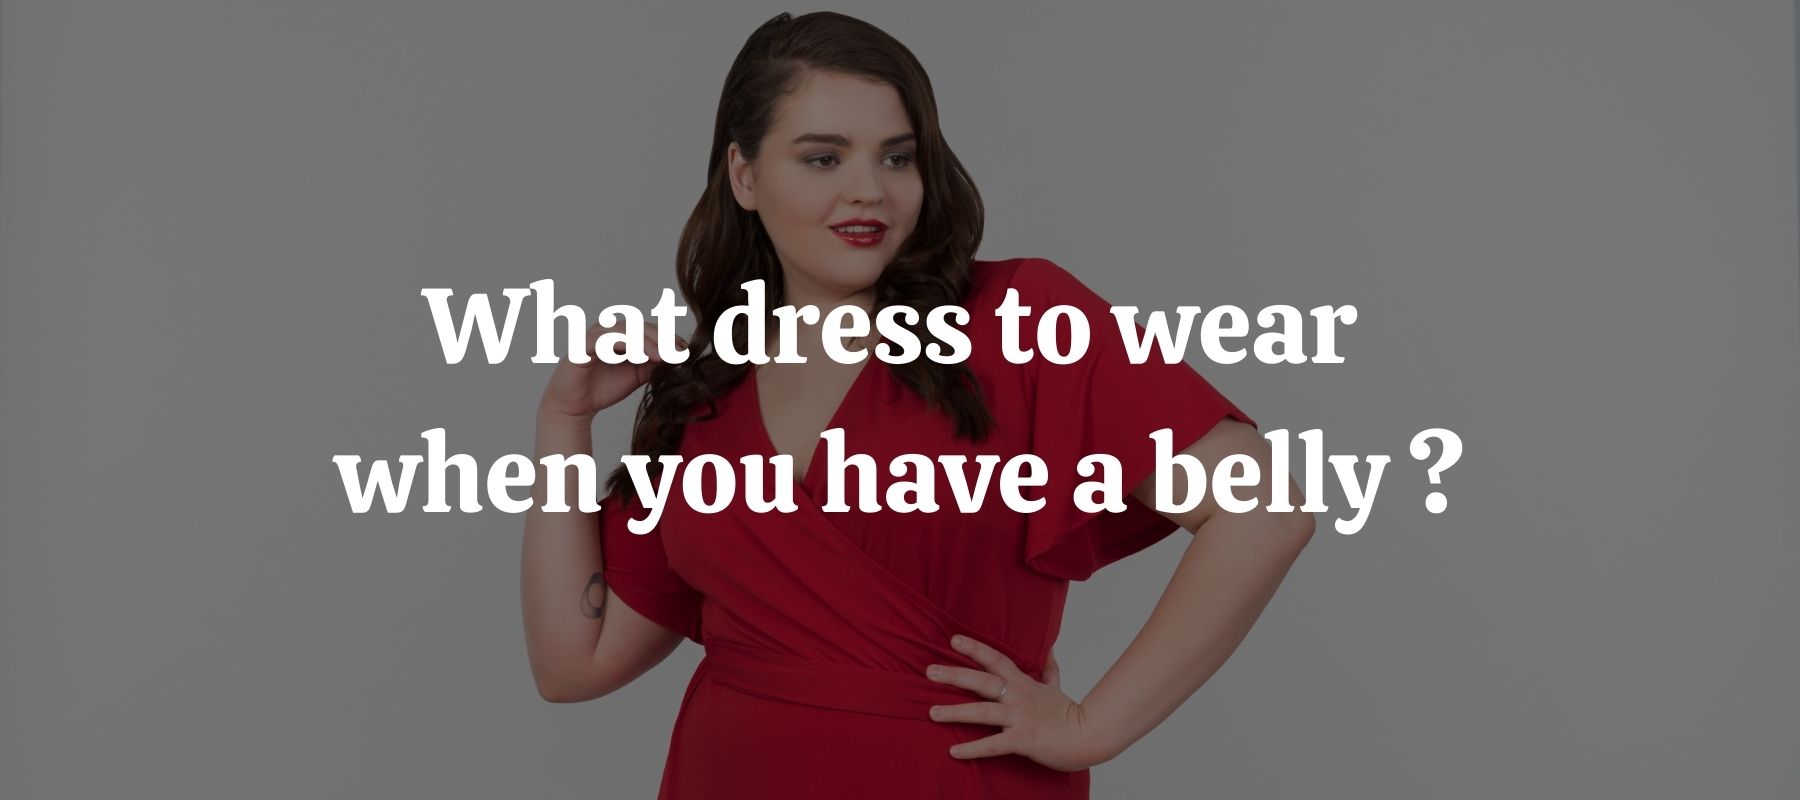 What dress to wear when you have a belly